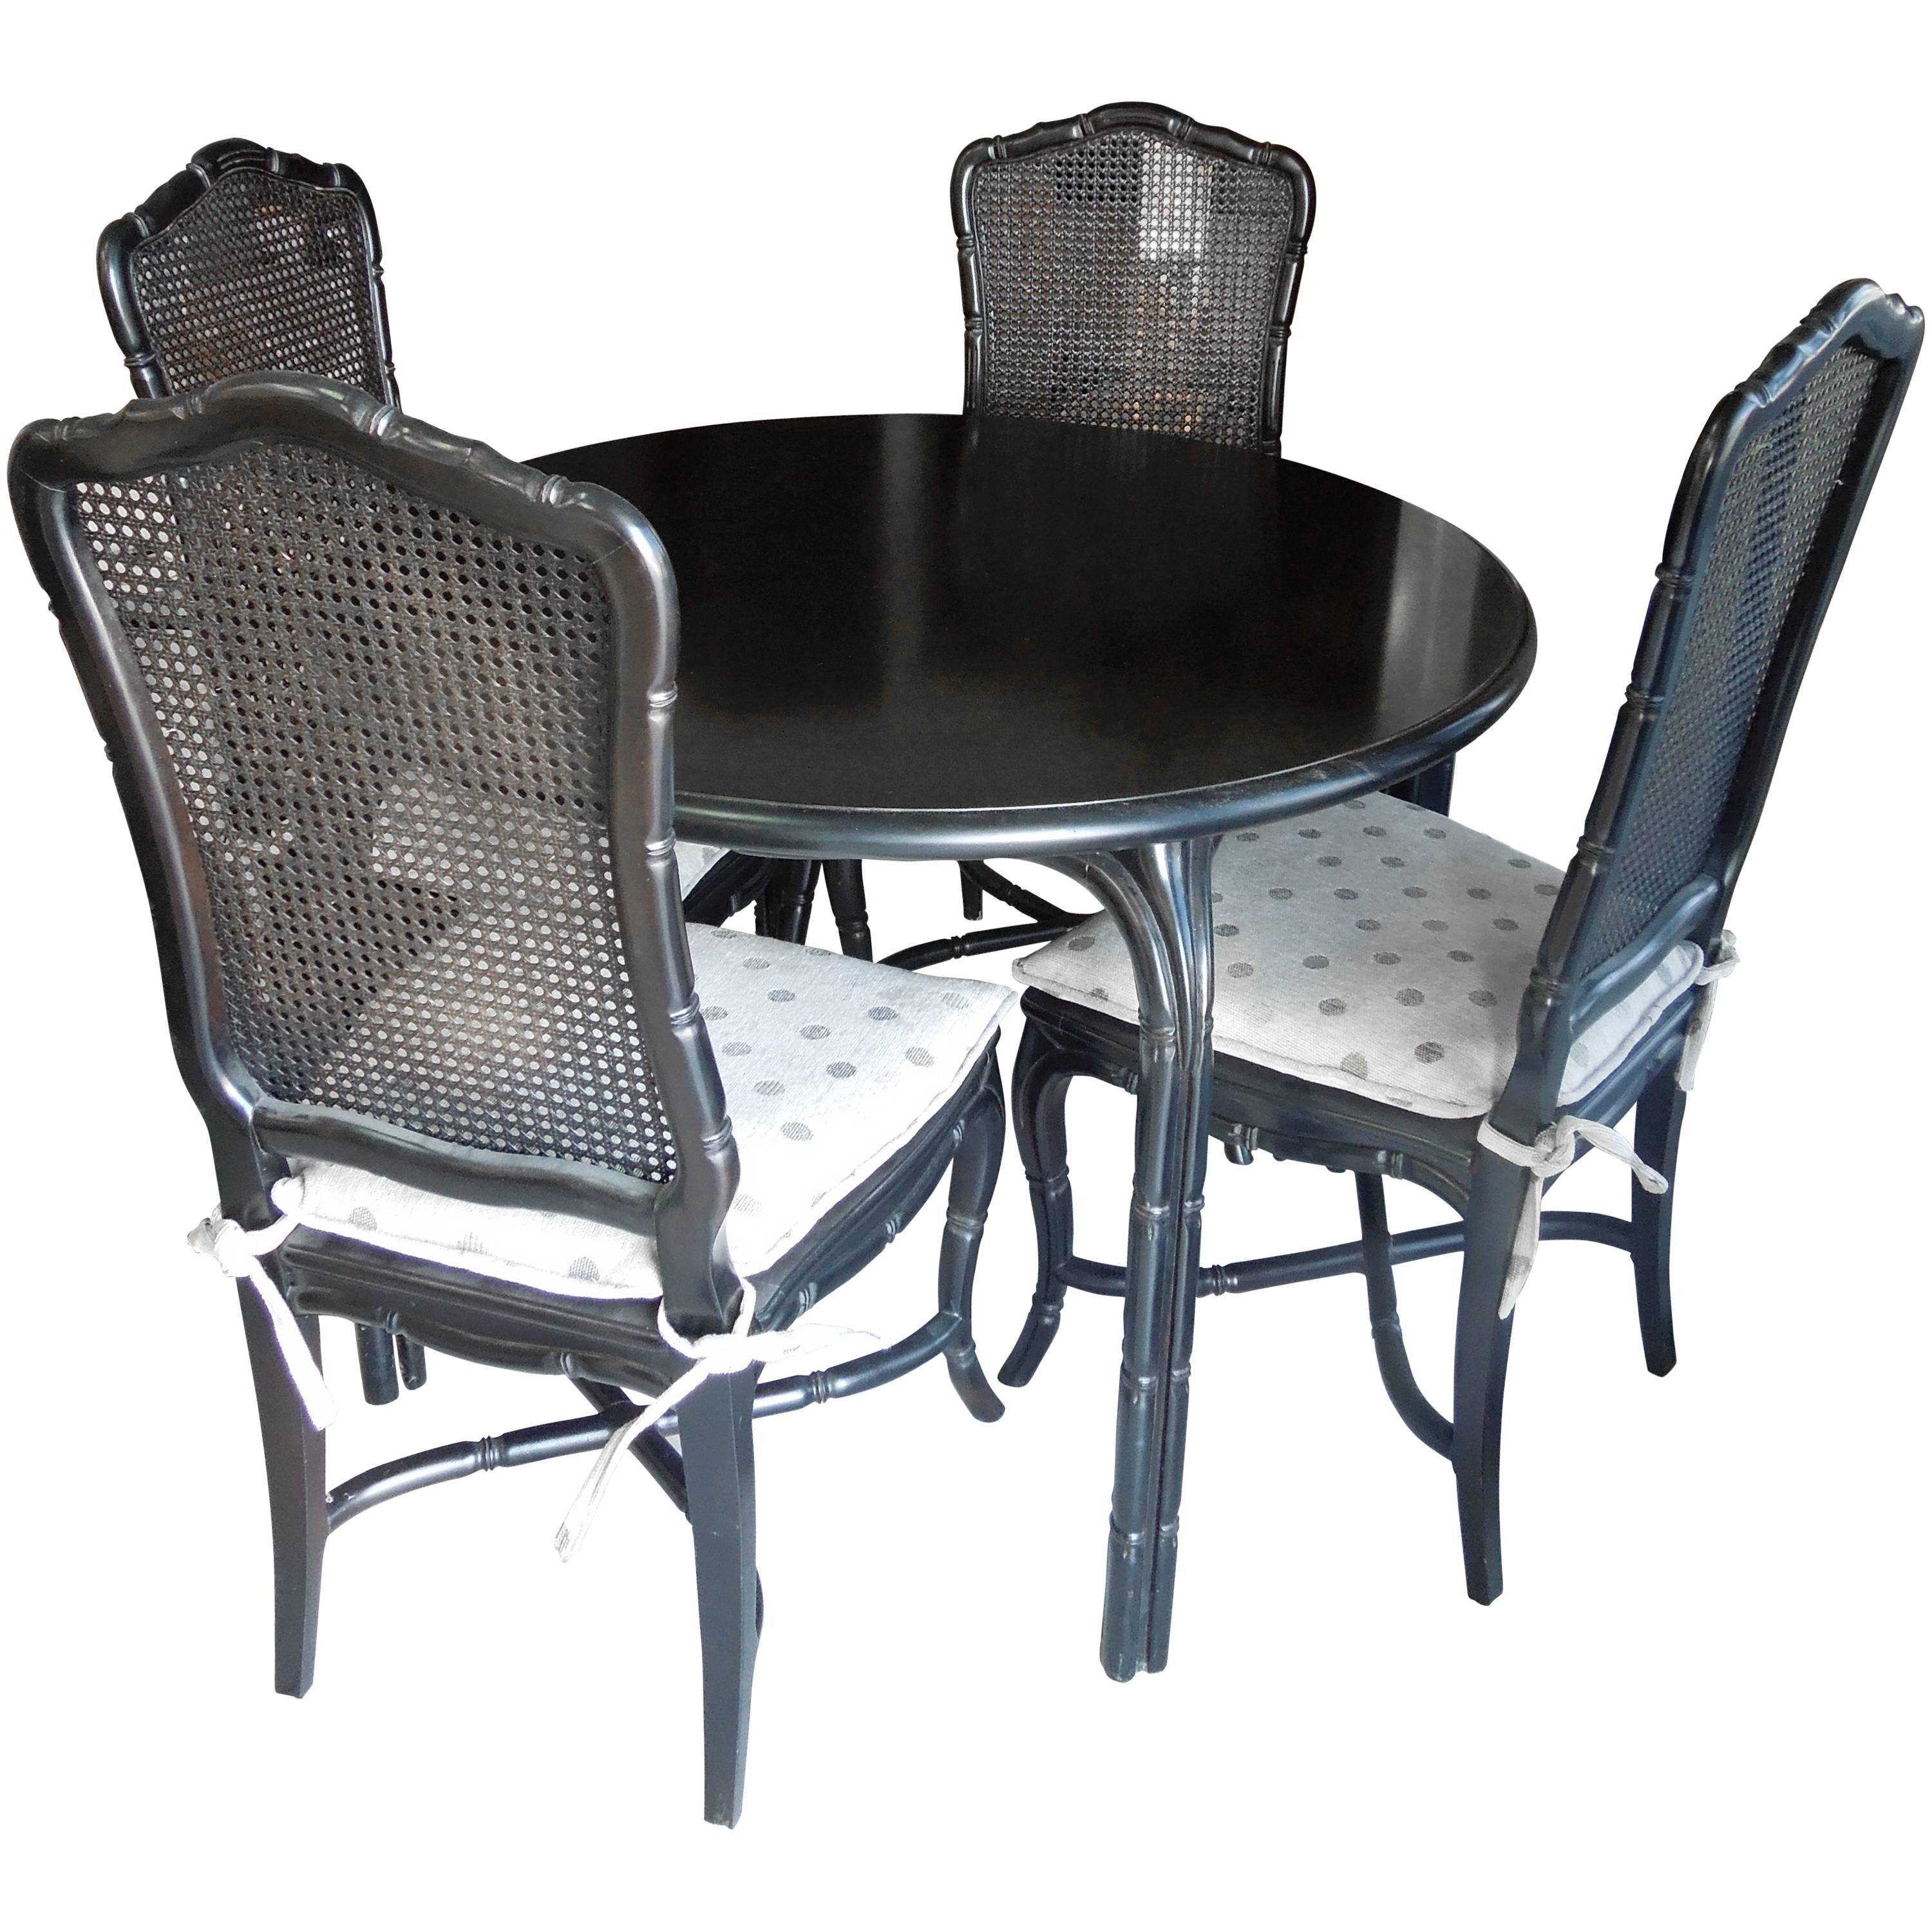 Vintage Hollywood Regency Black Round Dining or Game Table and Four Chairs Set